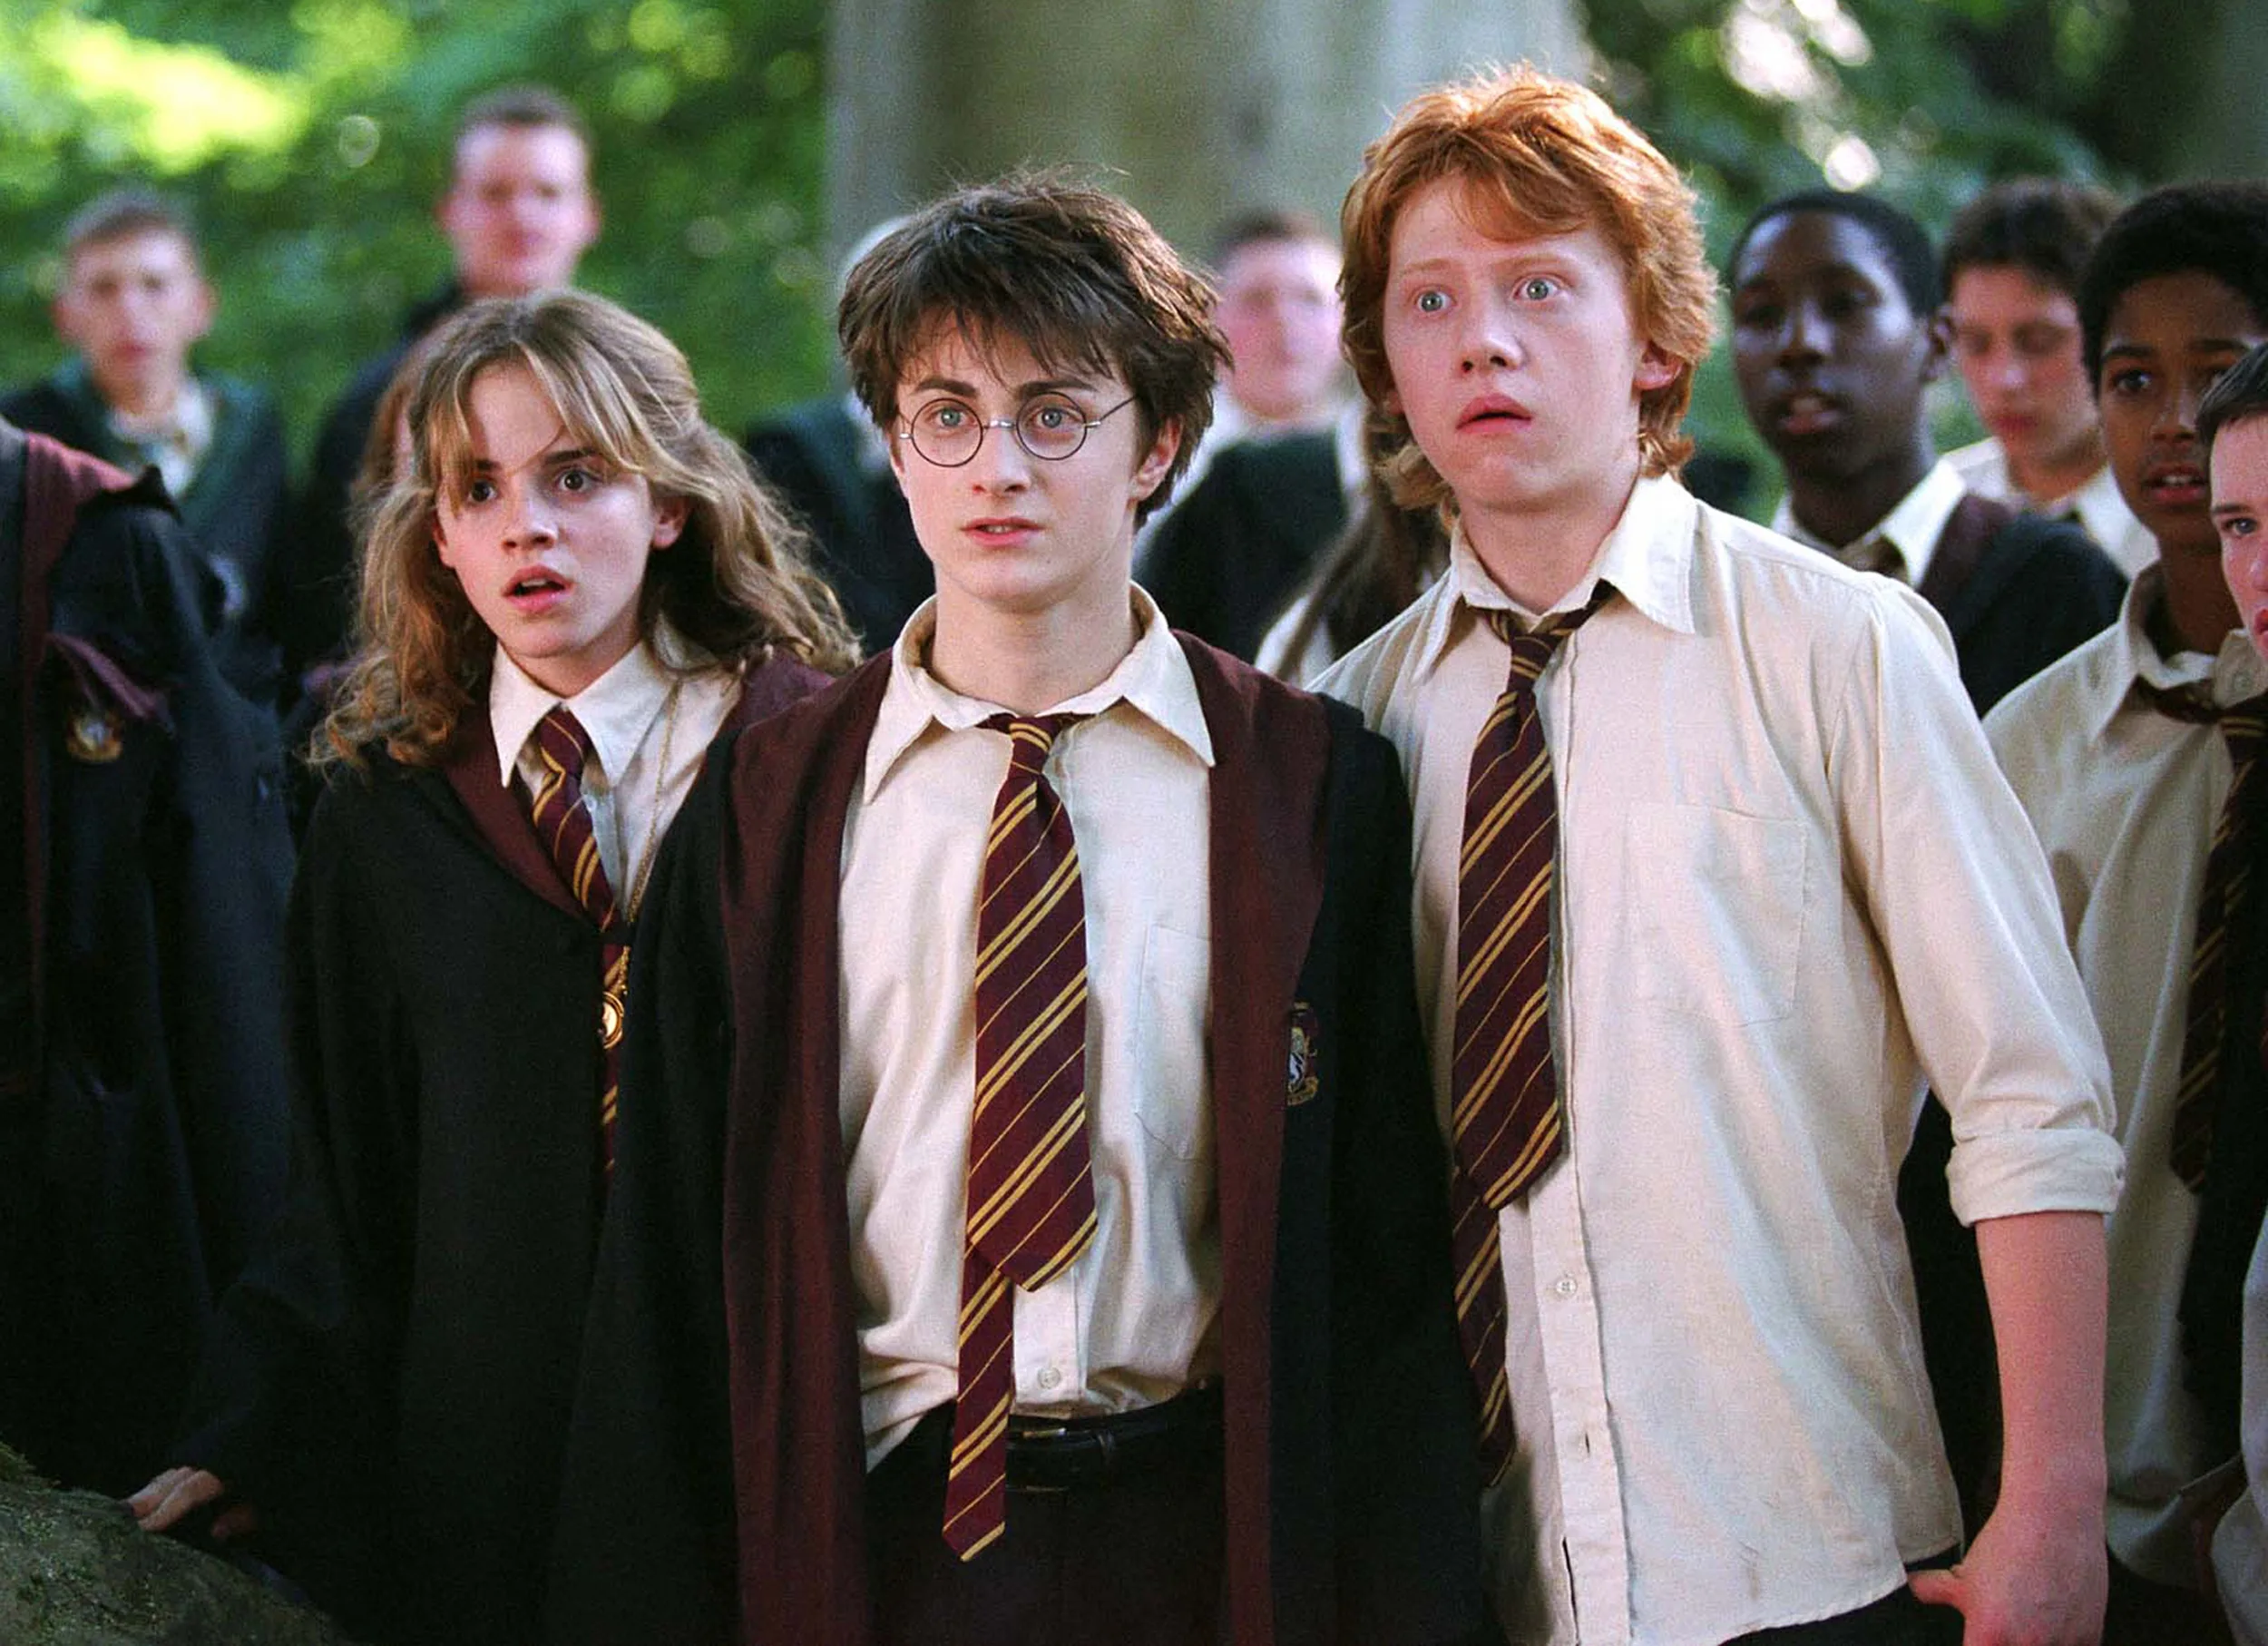 Emma Watson, Daniel Radcliffe and  Rupert Grint in a scene from 'Harry Potter and the Prisoner of Azkaban'.  (AP Photo/Warner Bros.,